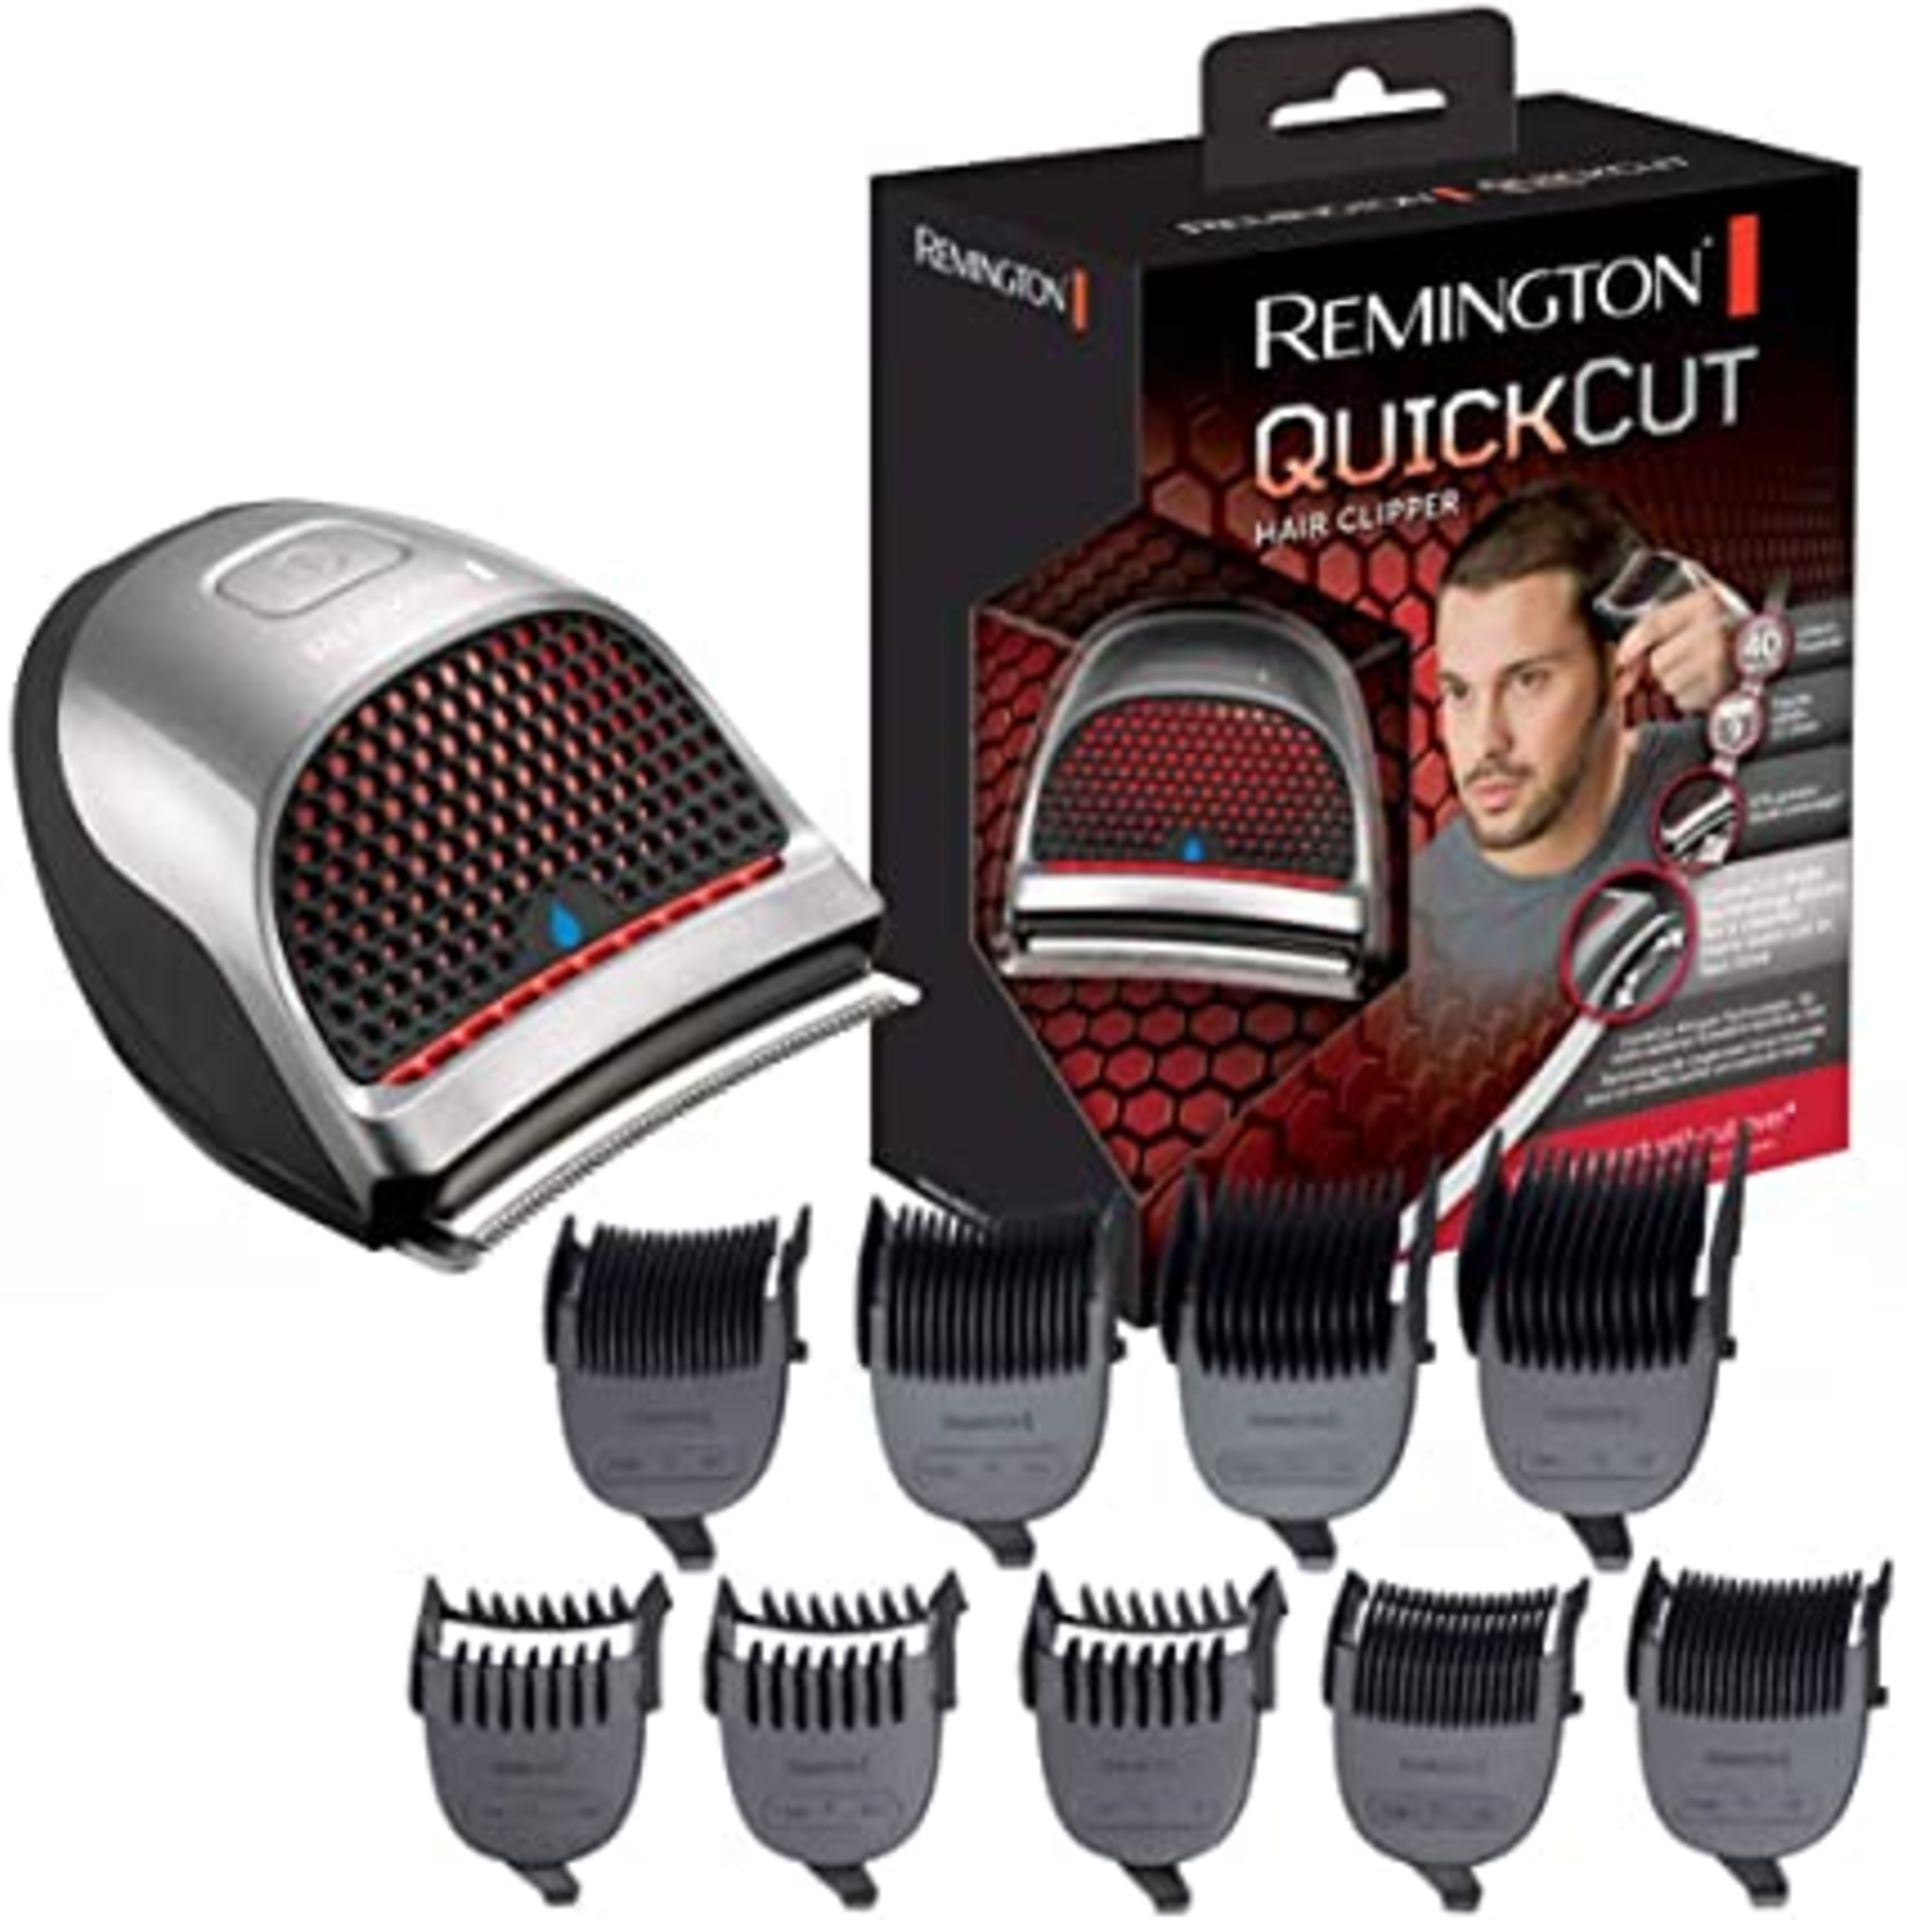 Brand New Remington Quick Cut Hair Clippers with 9 Comb Lengths Curved